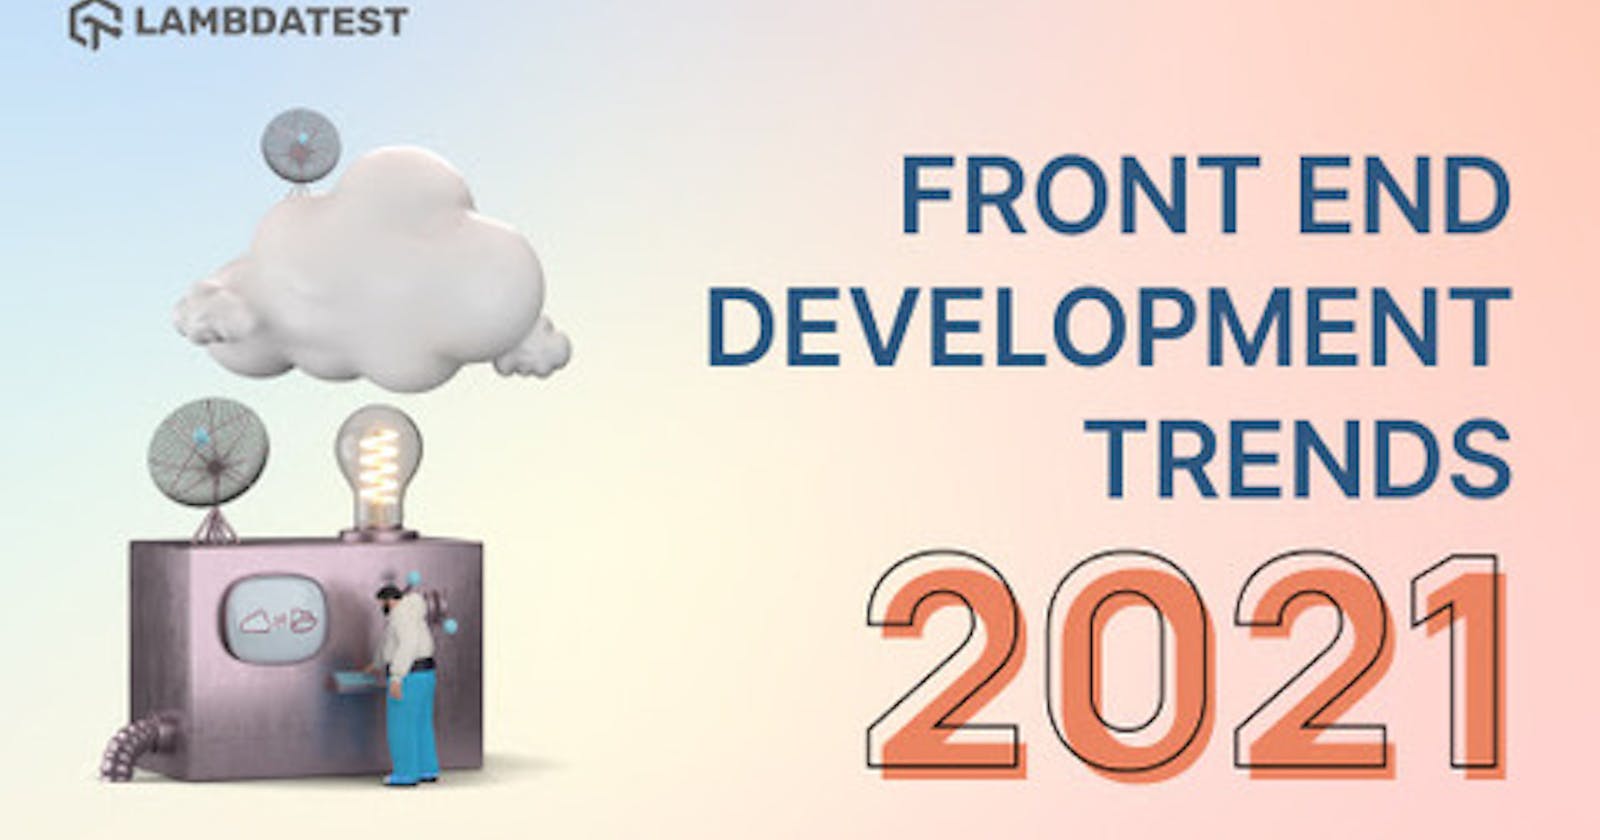 11 Front End Development Trends You Should Follow in 2021